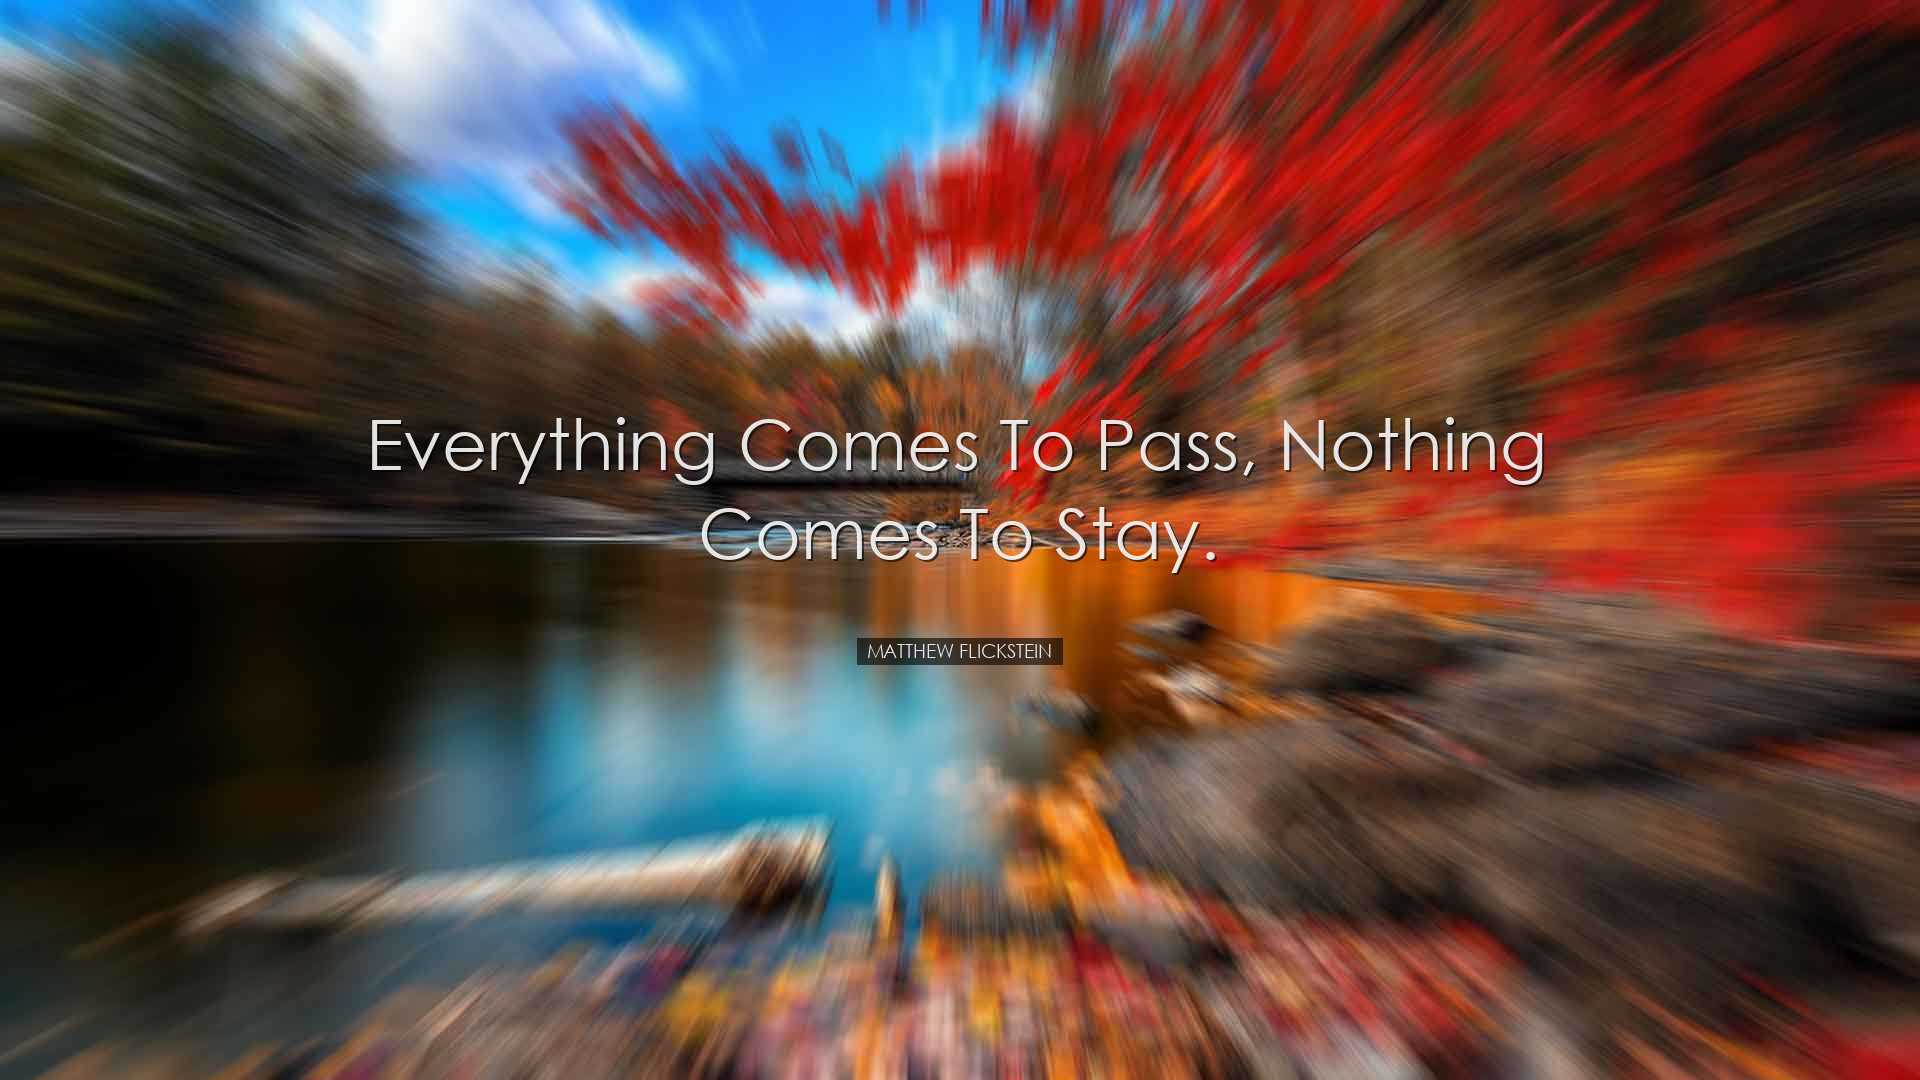 Everything comes to pass, nothing comes to stay. - Matthew Flickst